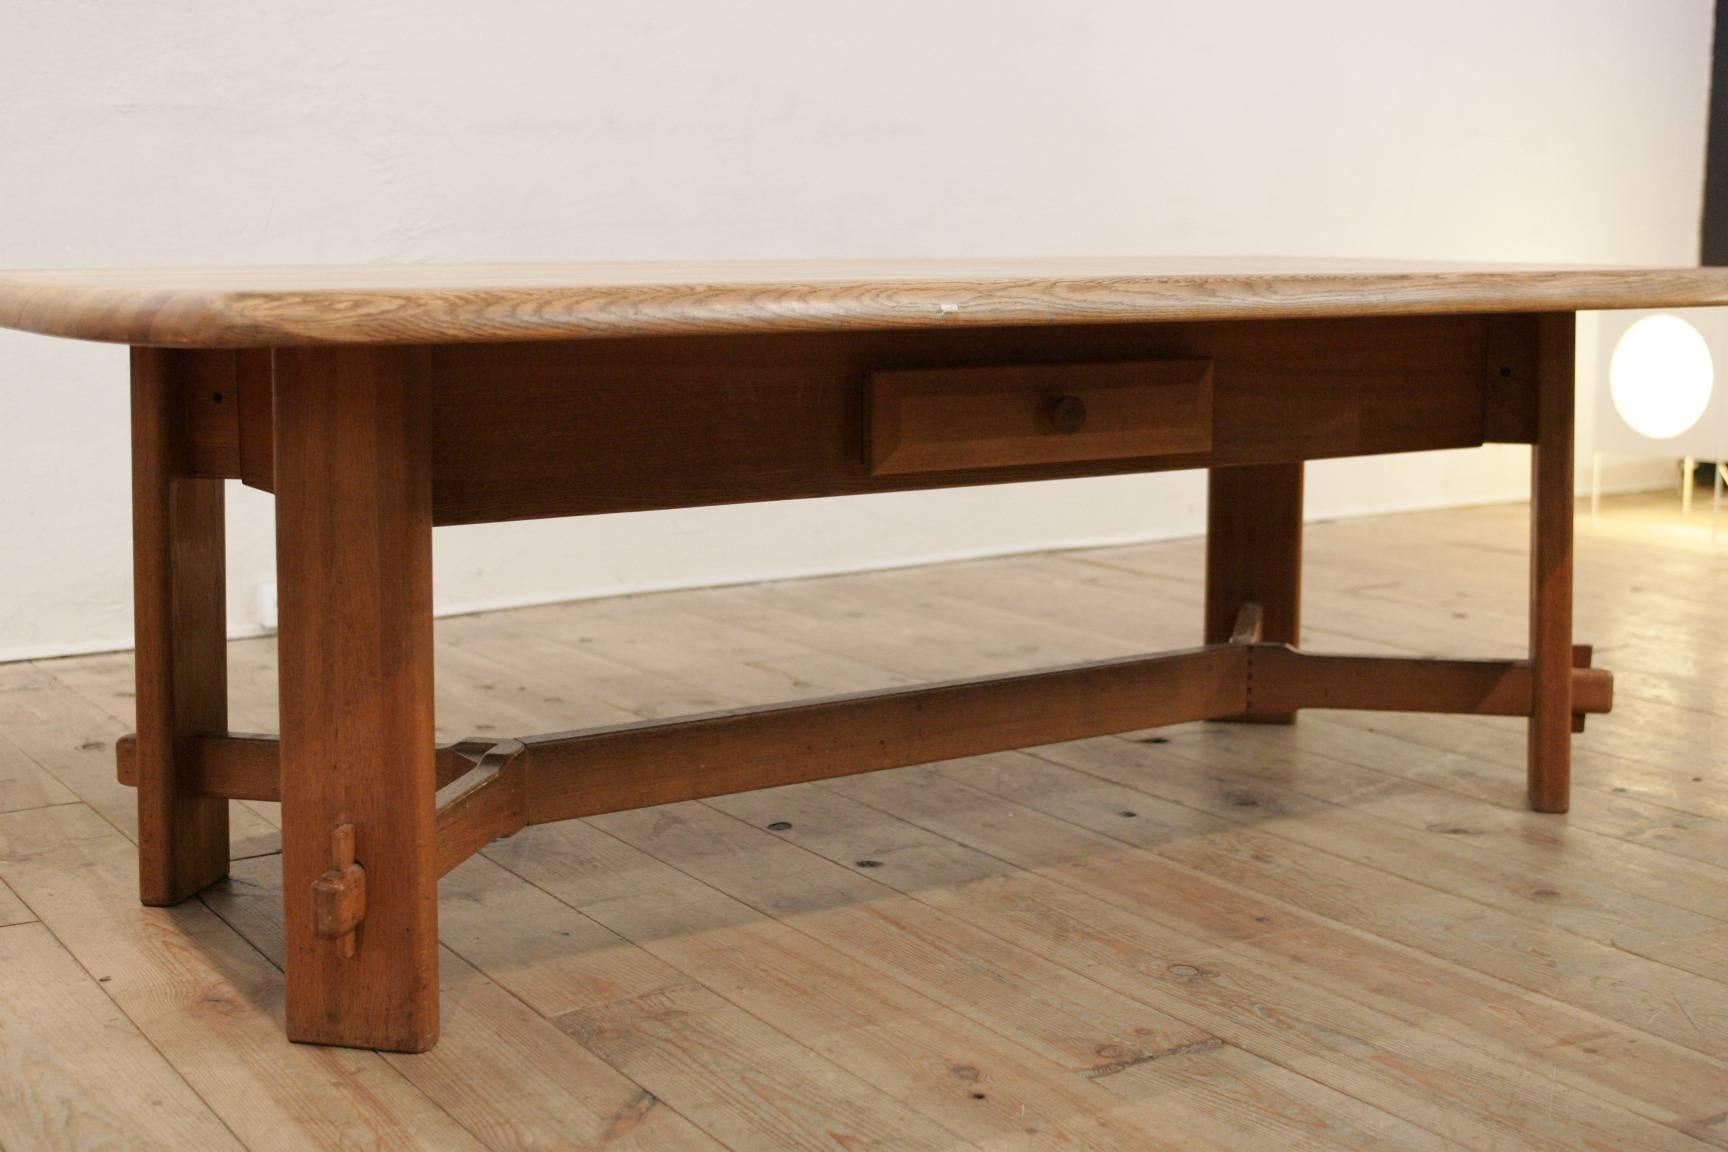 A large 1960 table in the manner of Charlotte Perriand or Pierre Chapo made of massive oak.
This table and the top are very heavy and high quality.